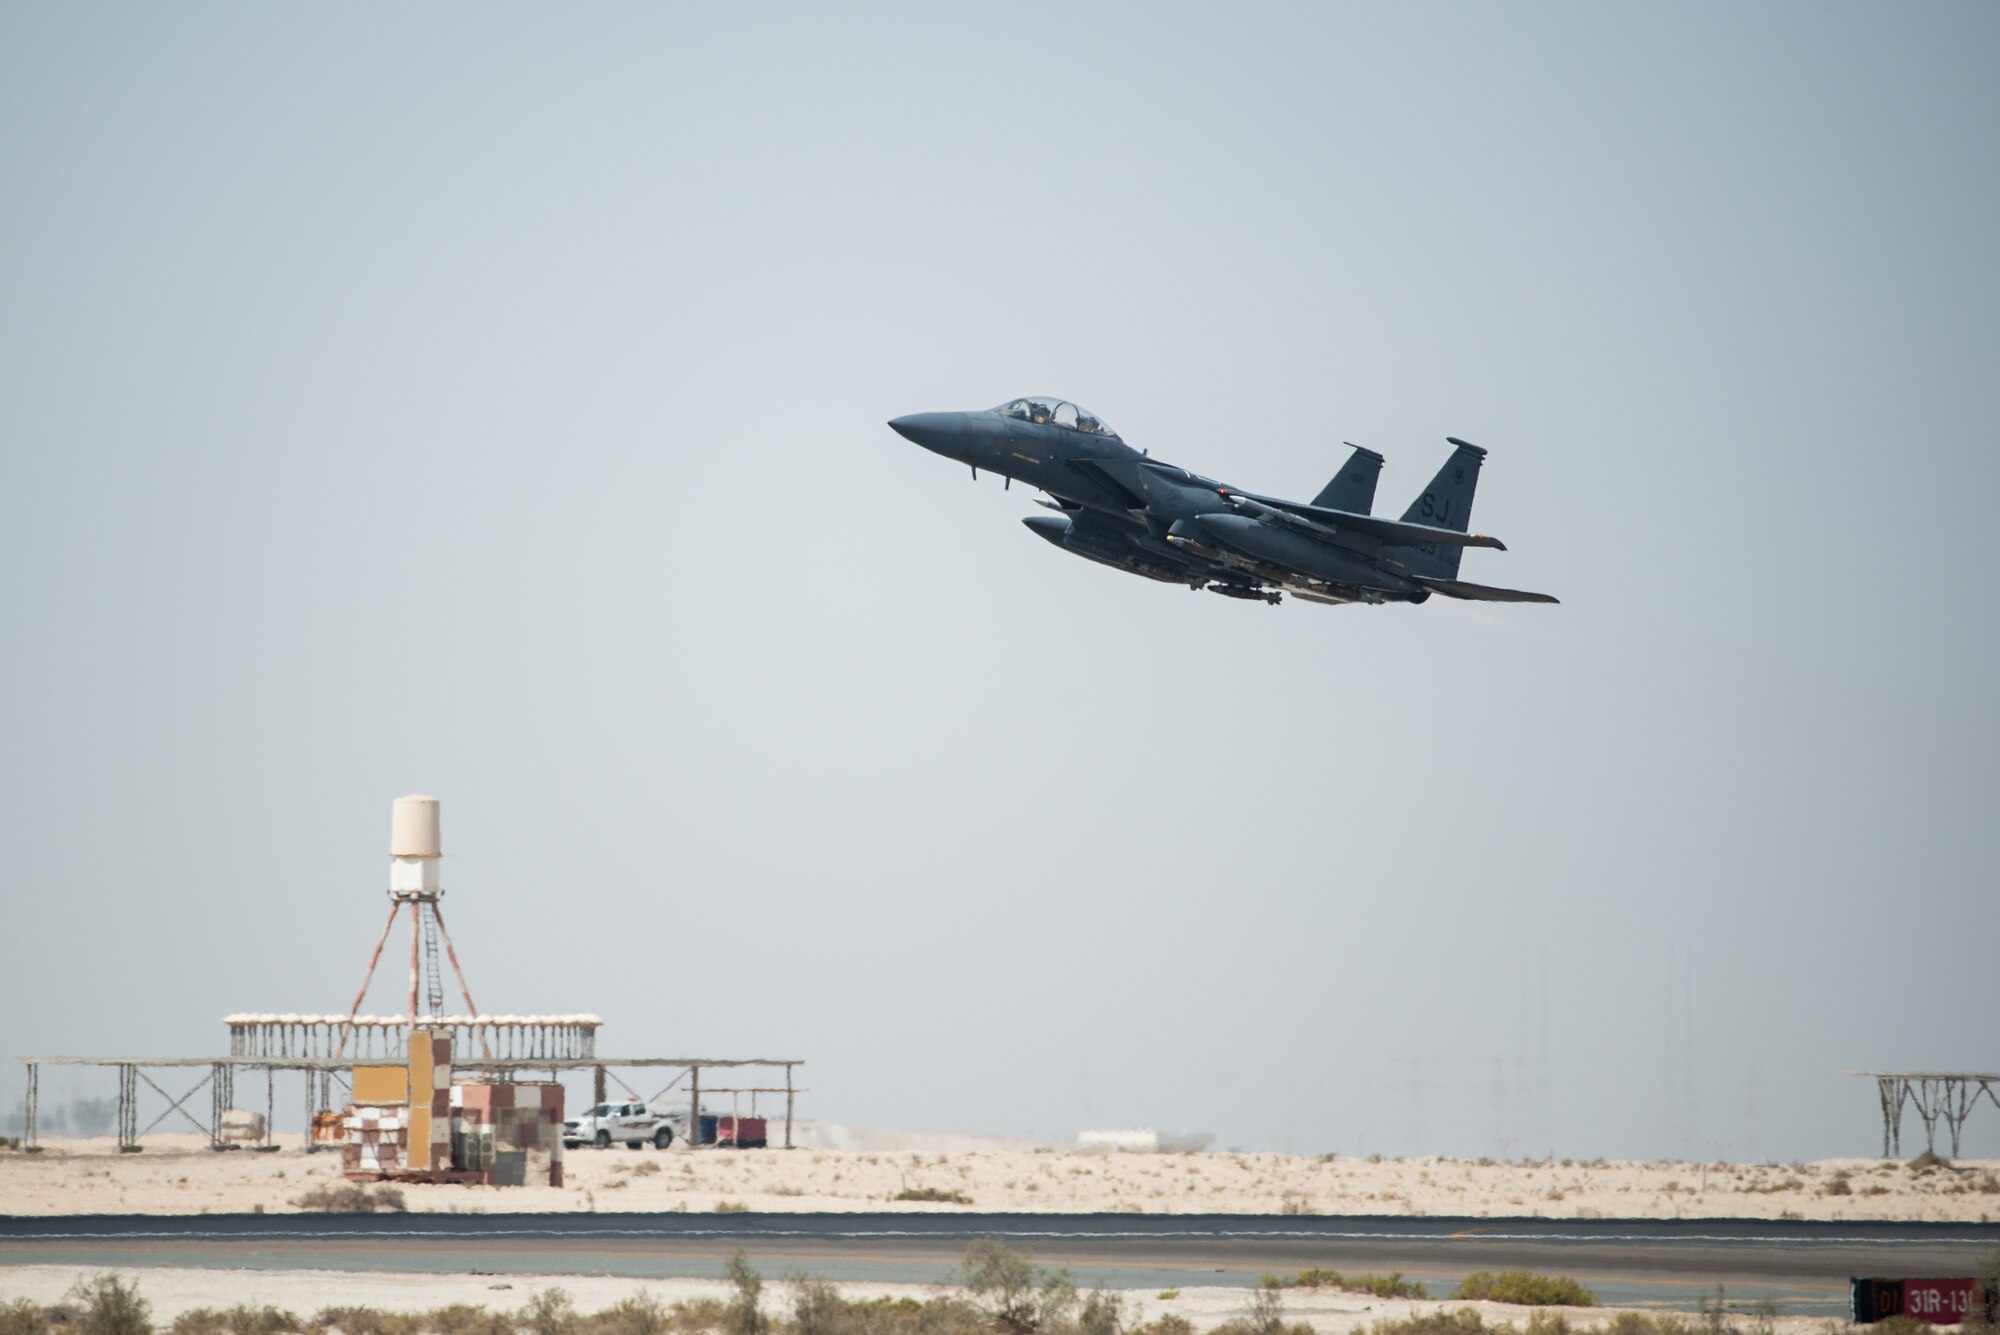 An F-15E Strike Eagle, assigned to the 336th Expeditionary Fighter Squadron, takes off for Agile Strike Sept. 18, 2019, at Al Dhafra Air Base, United Arab Emirates. The 336th EFS sent two aircraft and personnel to operate missions out of Prince Sultan Air Base, Saudi Arabia to challenge their flexibility at expanding tactical and strategic reach while strengthening coalition and regional partnerships in the Air Forces Central Command area of responsibility through adaptive basing. (U.S. Air Force photo by Staff Sgt. Chris Thornbury)